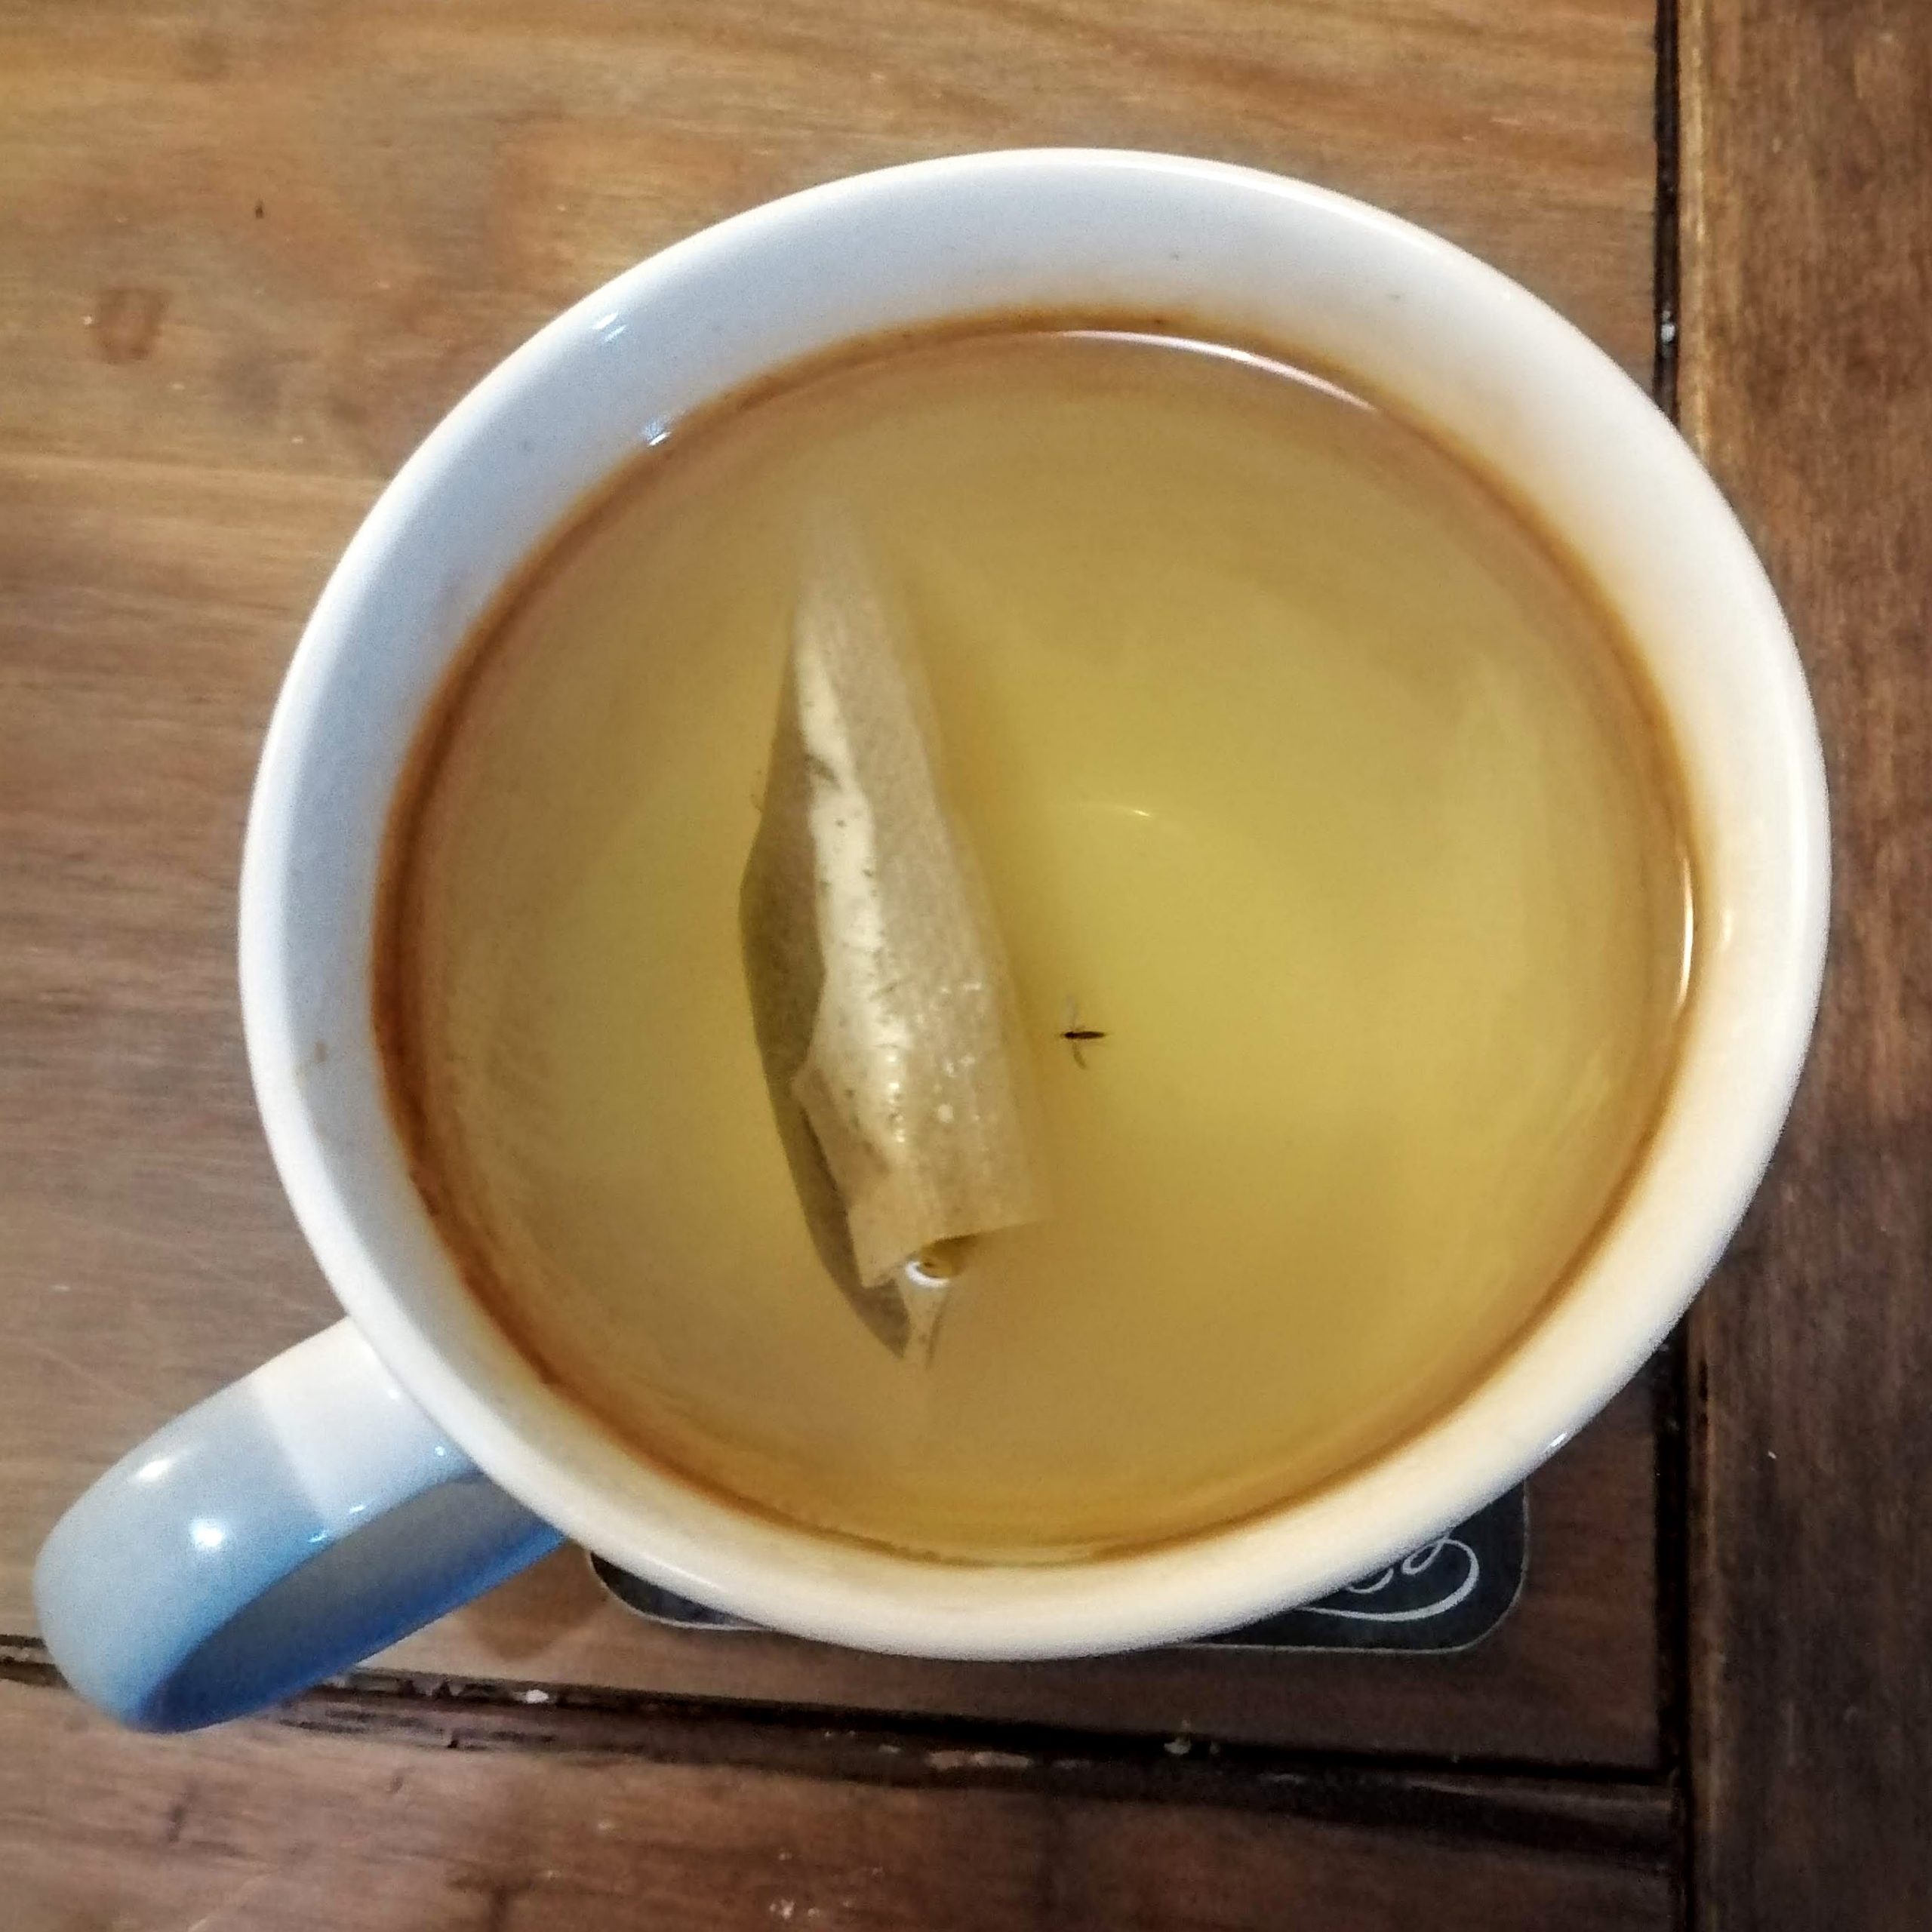 green tea with fly in it